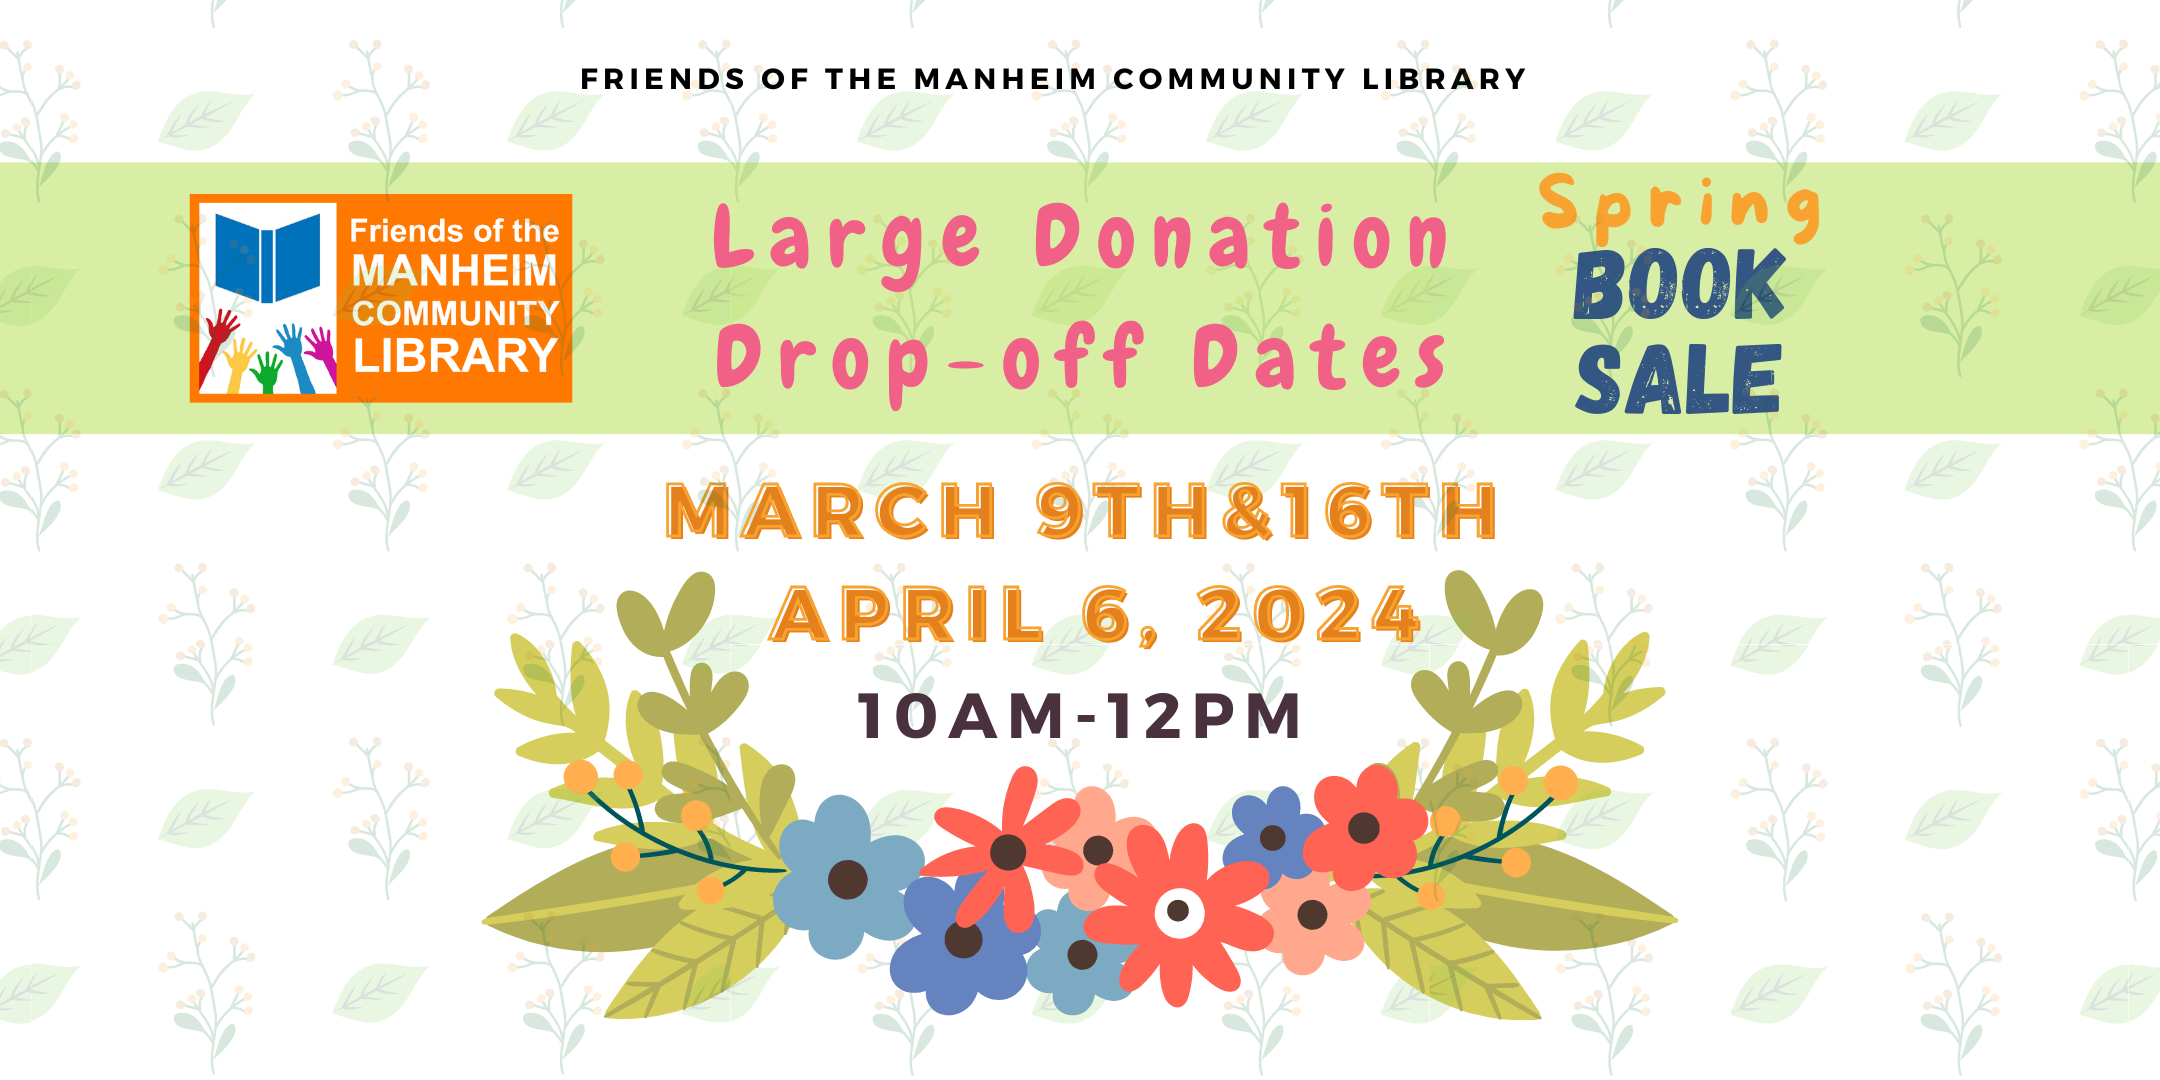 Large Donation Drop-off dates on March 9th,16th, and April 6th at 10am-12pm